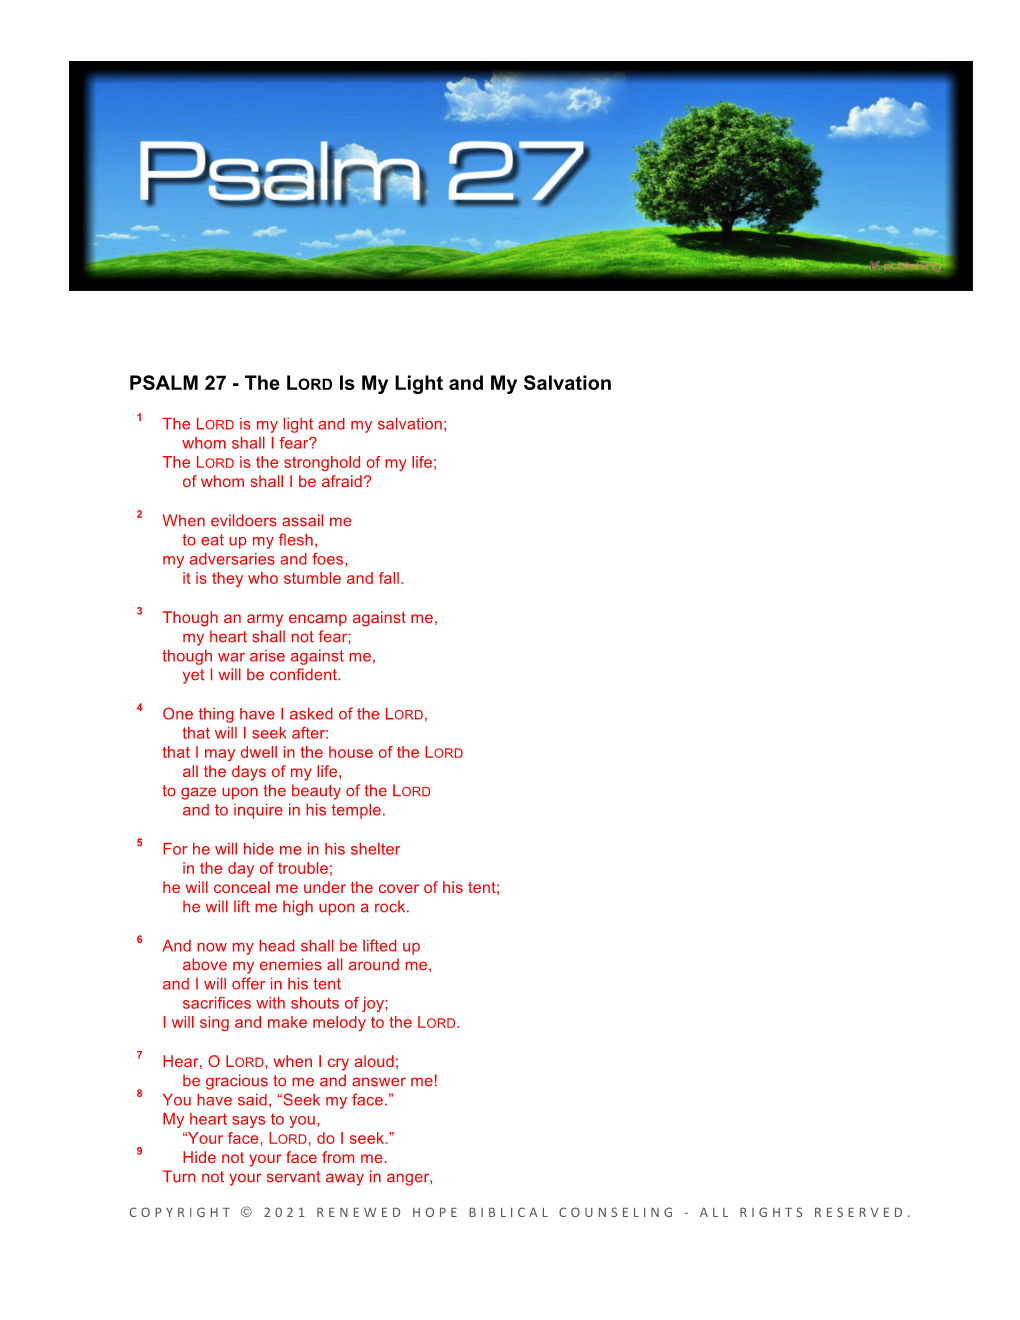 PSALM 27 - the LORD Is My Light and My Salvation